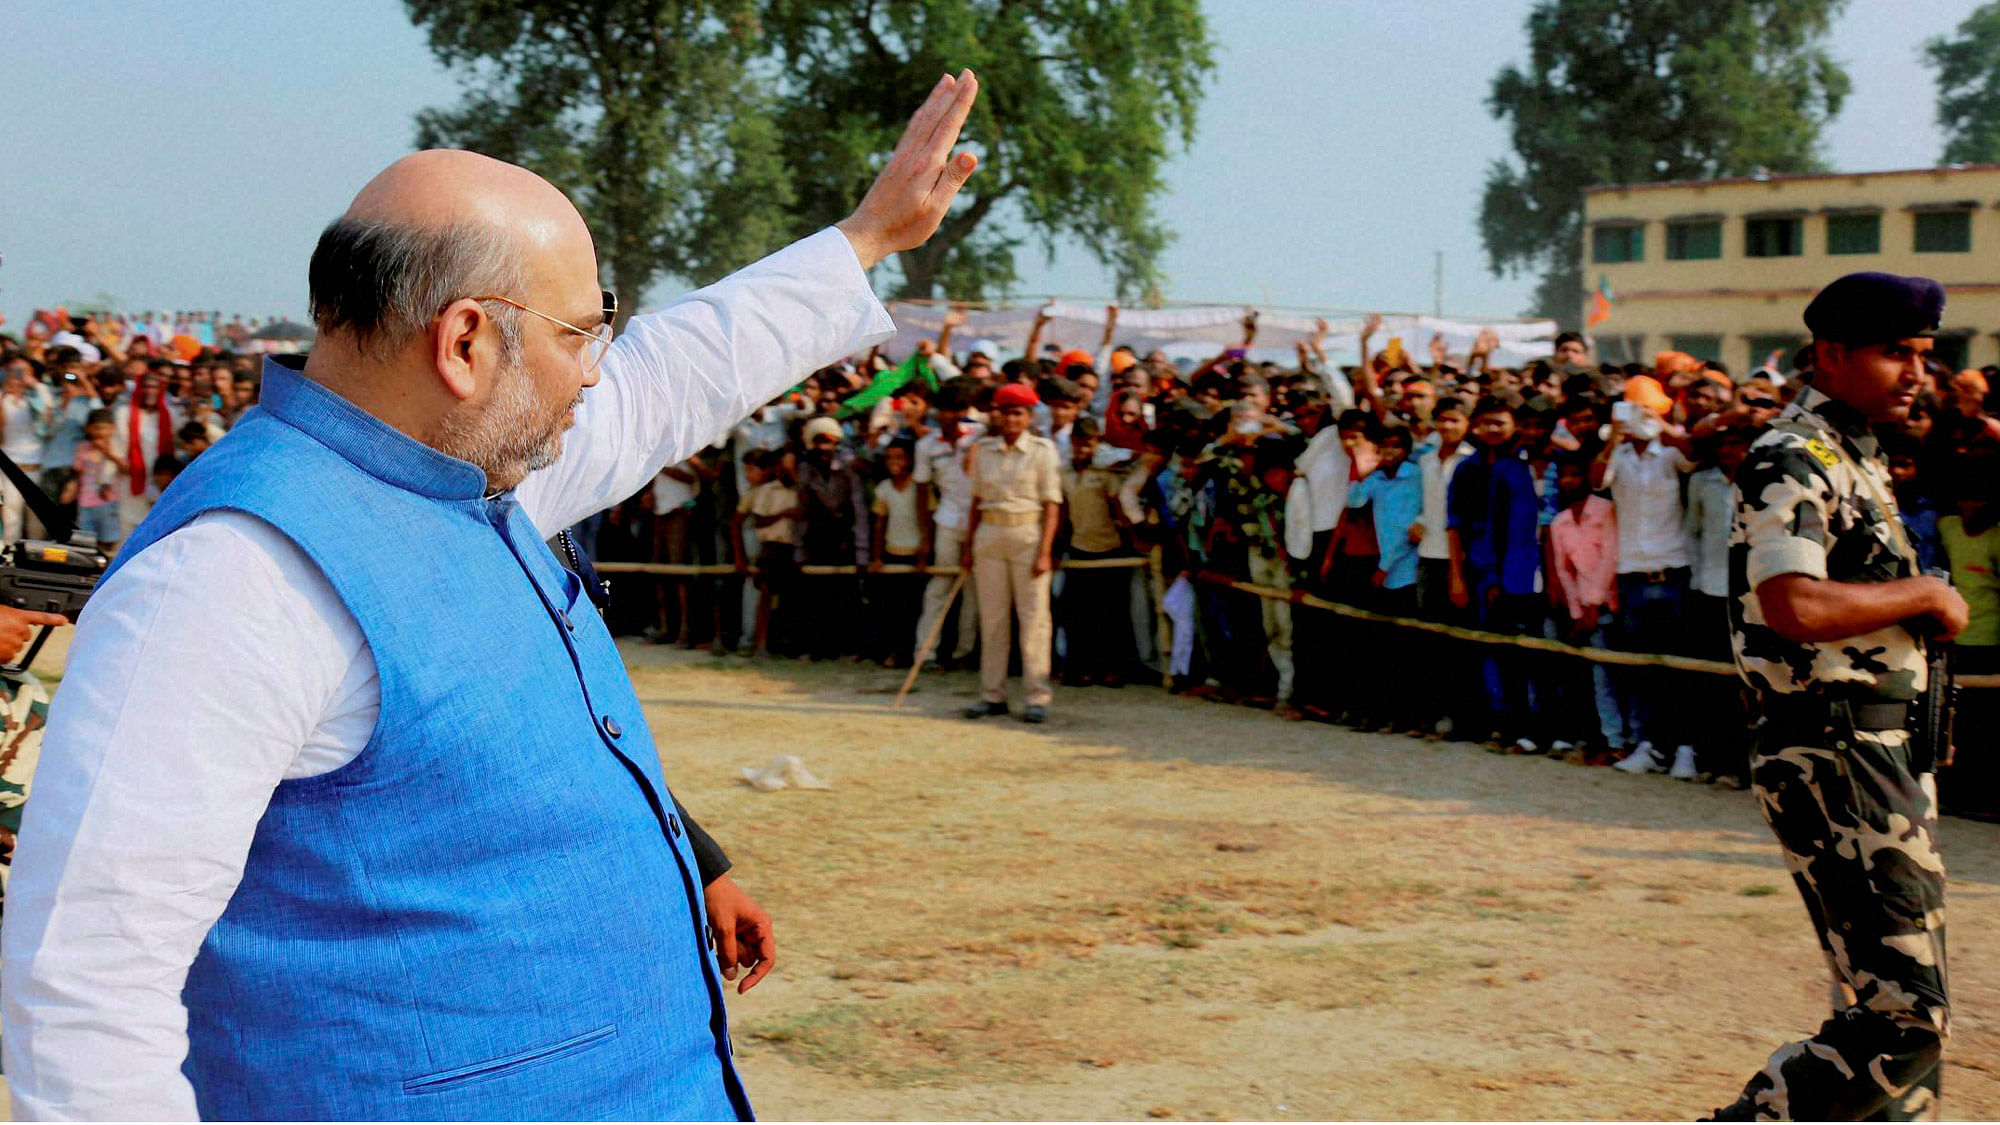 BJP president Amit Shah who has emerged as the real political boss, calling the shots in the party’s high octane campaign in the state. (Photo: PTI)